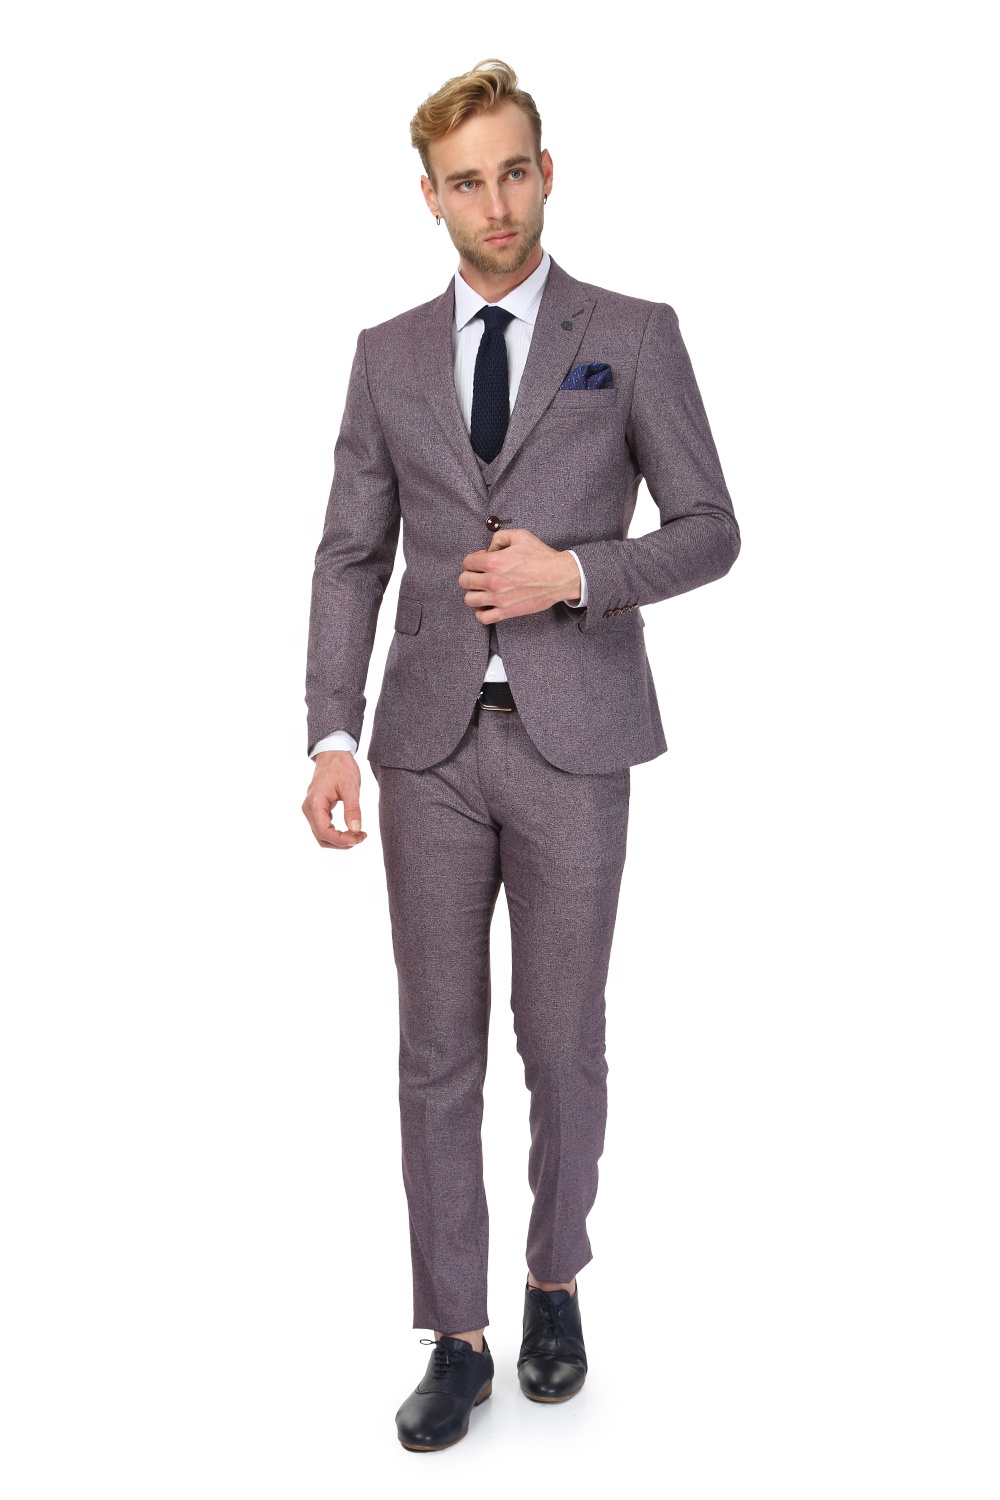 3 piece suits for men is a timeless and versatile ensemble that exudes sophistication and elegance. Comprising a jacket,